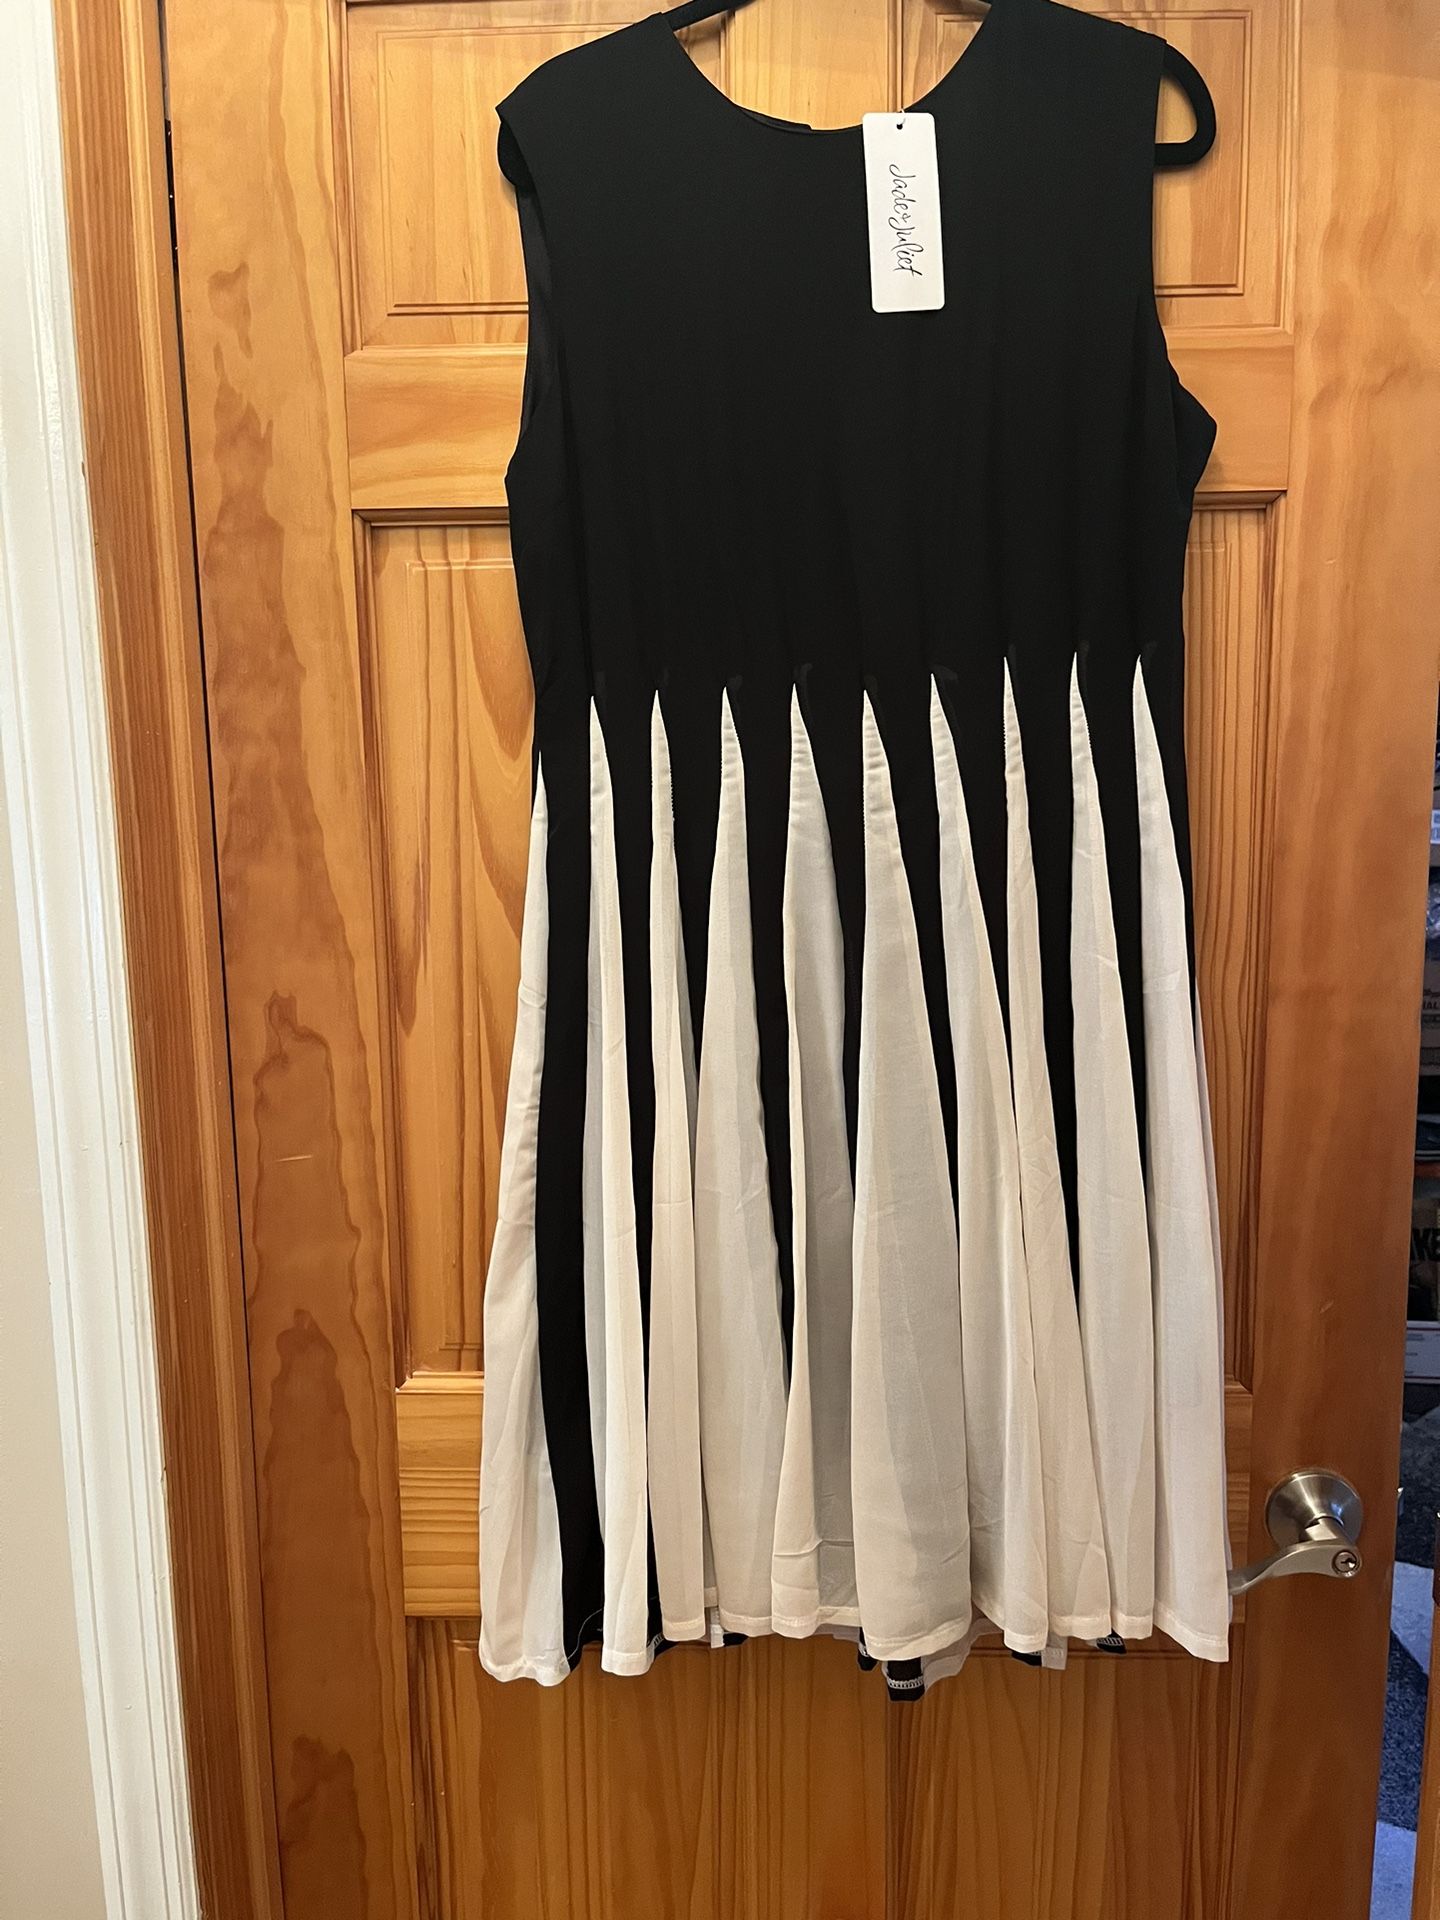 New dress for ladies. Black and white design. There is a slip under and open back with few buttons. Beautiful for any occasion. Size XXL